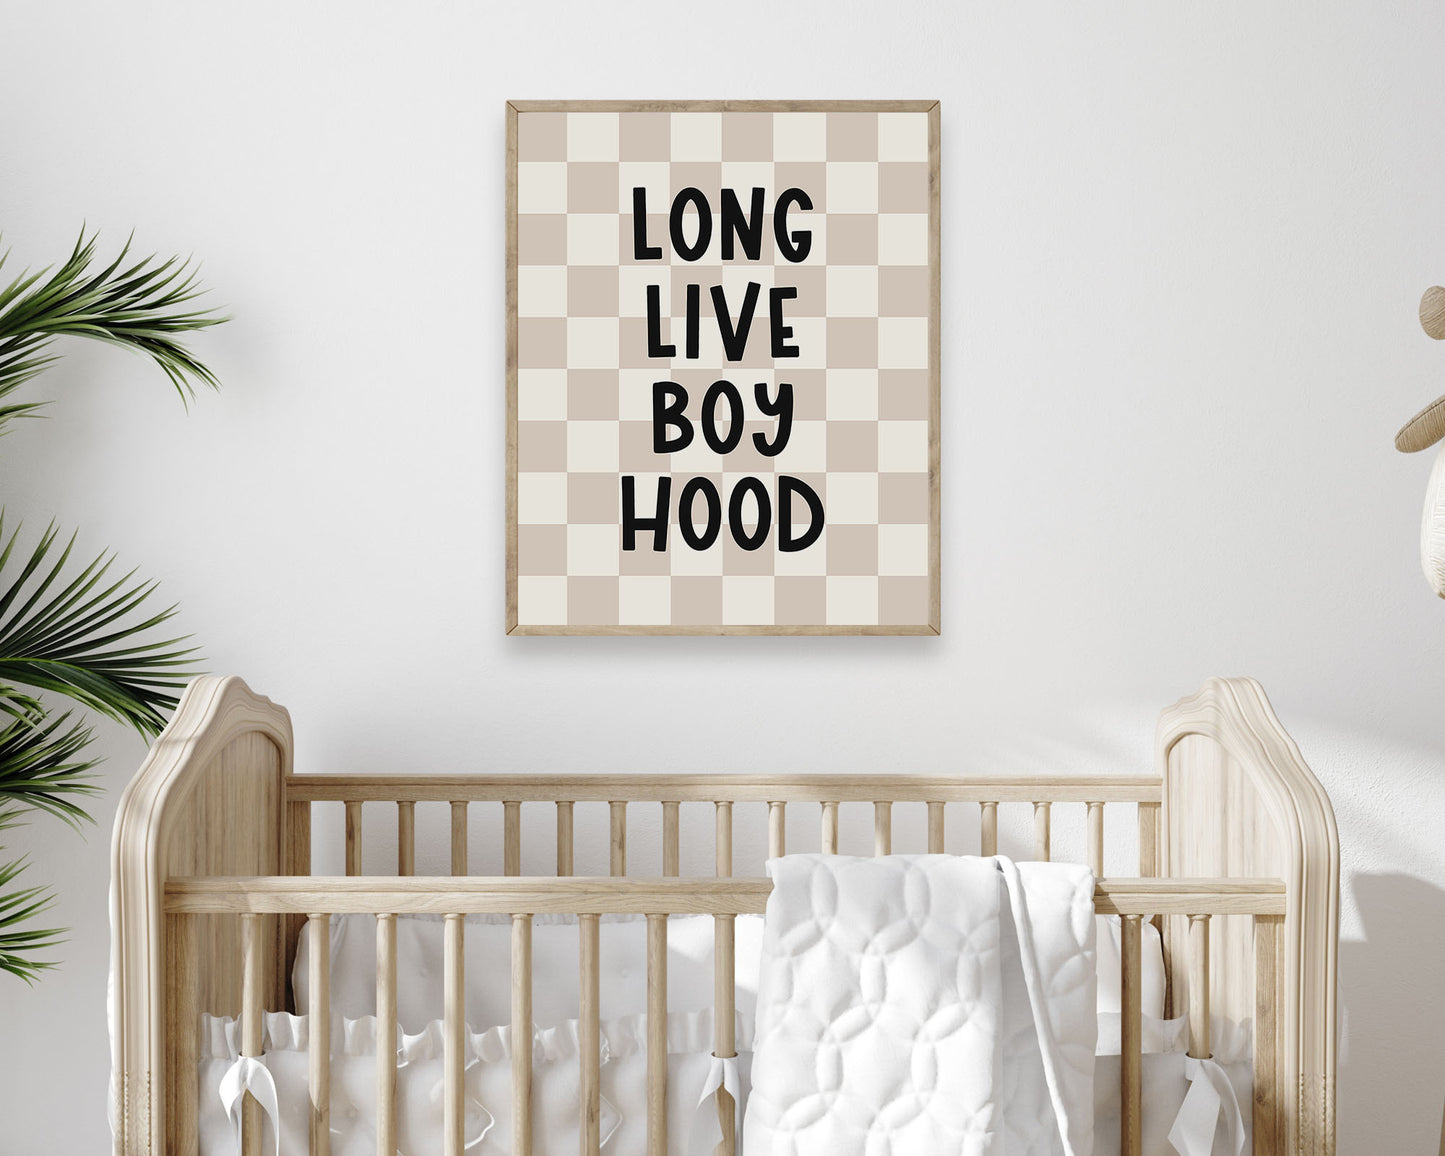 Long Live Boy Hood Digital Print featuring fun black lettering on a neutral tan and off white checkered background. Perfect for Baby Boy Nursery Decor, Toddler Boys Bedroom Decor or Children's Play Room Wall Art.